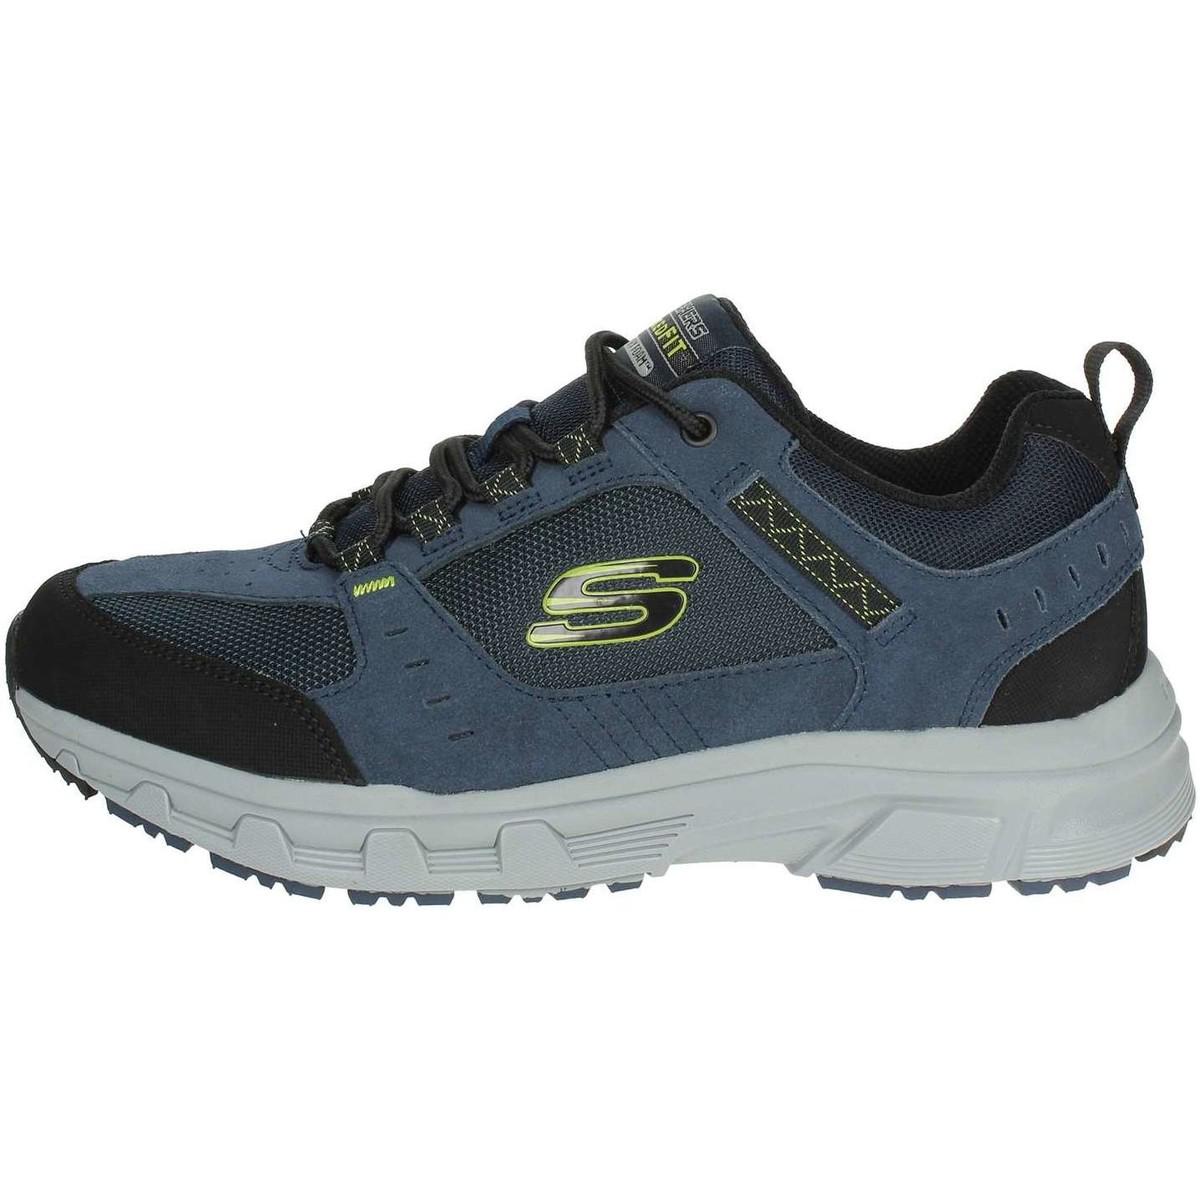  Skechers  51893 nvlm Men s Shoes  trainers In Blue for Men 